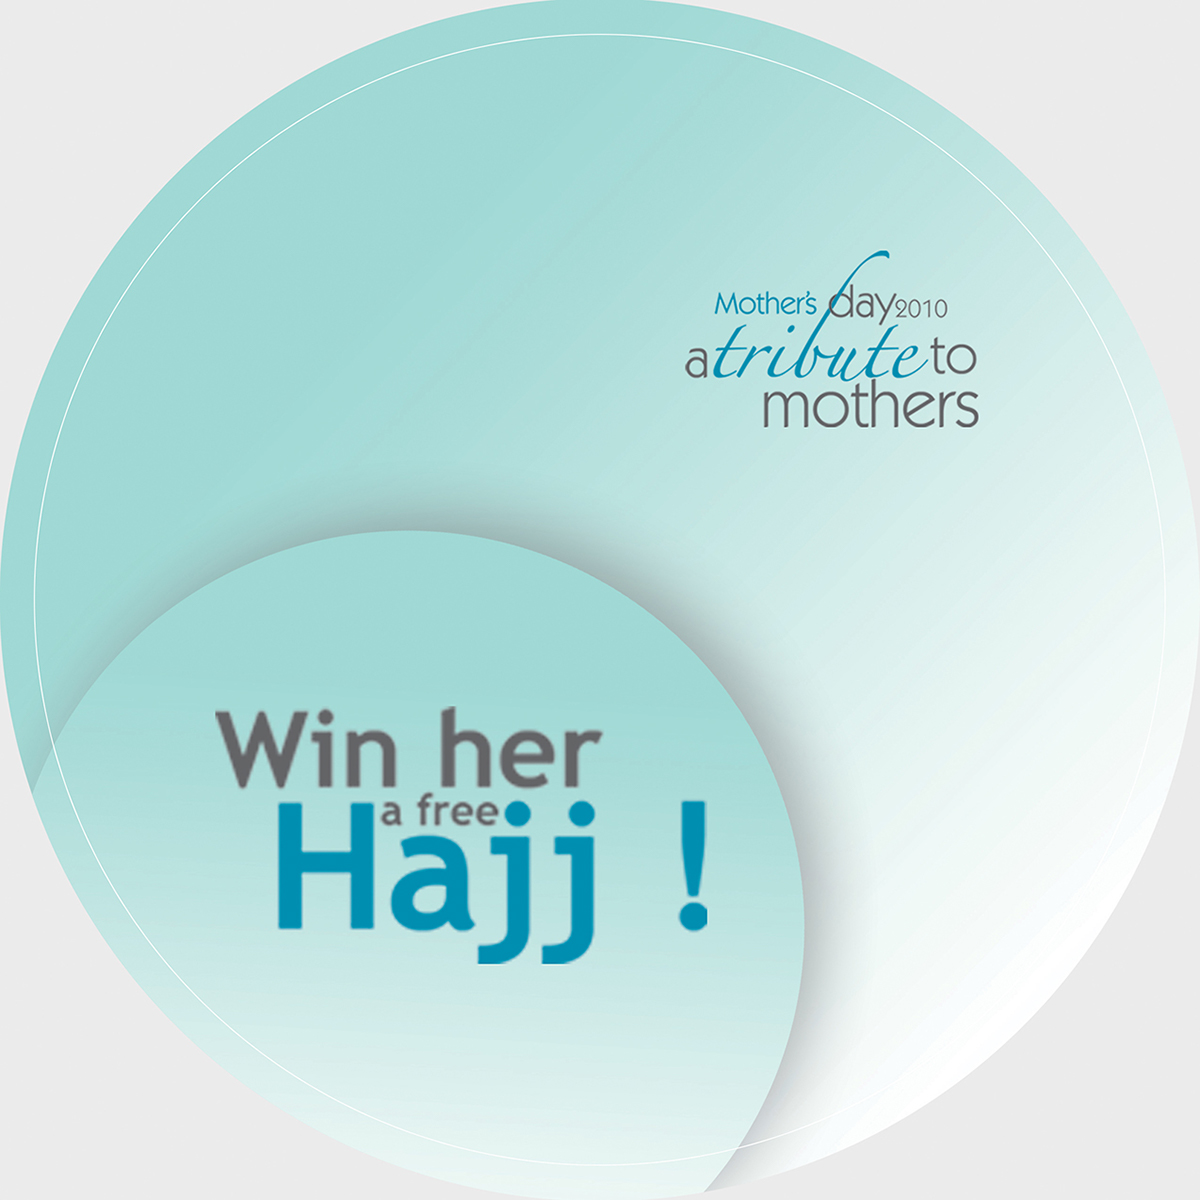 Stylo Shoes  hajj campaign A tribute to mothers day Waleed Arfeen Graphic Designer